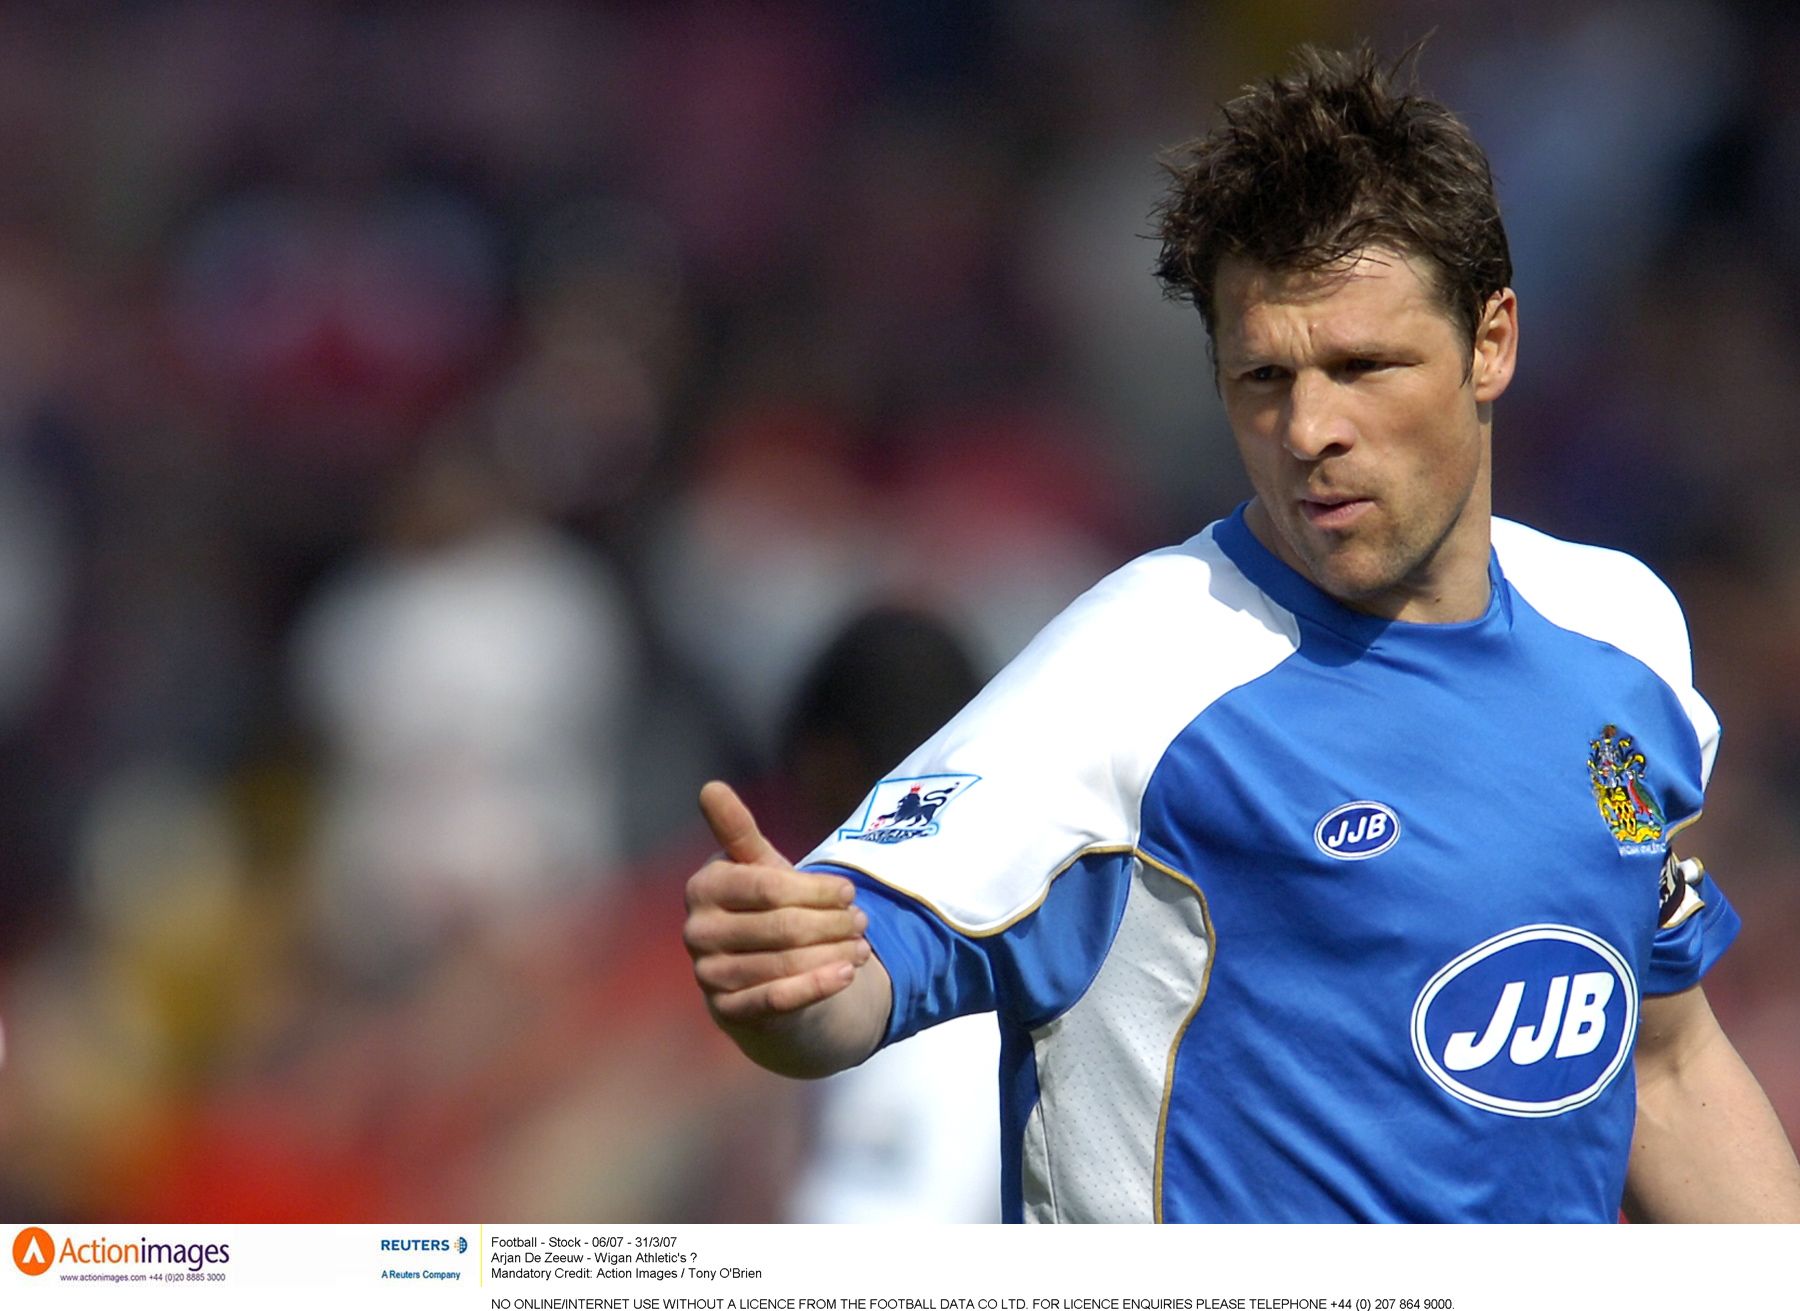 Football - Stock - 06/07 - 31/3/07 
Arjan De Zeeuw - Wigan Athletic's ? 
Mandatory Credit: Action Images / Tony O'Brien 
NO ONLINE/INTERNET USE WITHOUT A LICENCE FROM THE FOOTBALL DATA CO LTD. FOR LICENCE ENQUIRIES PLEASE TELEPHONE +44 (0) 207 864 9000.